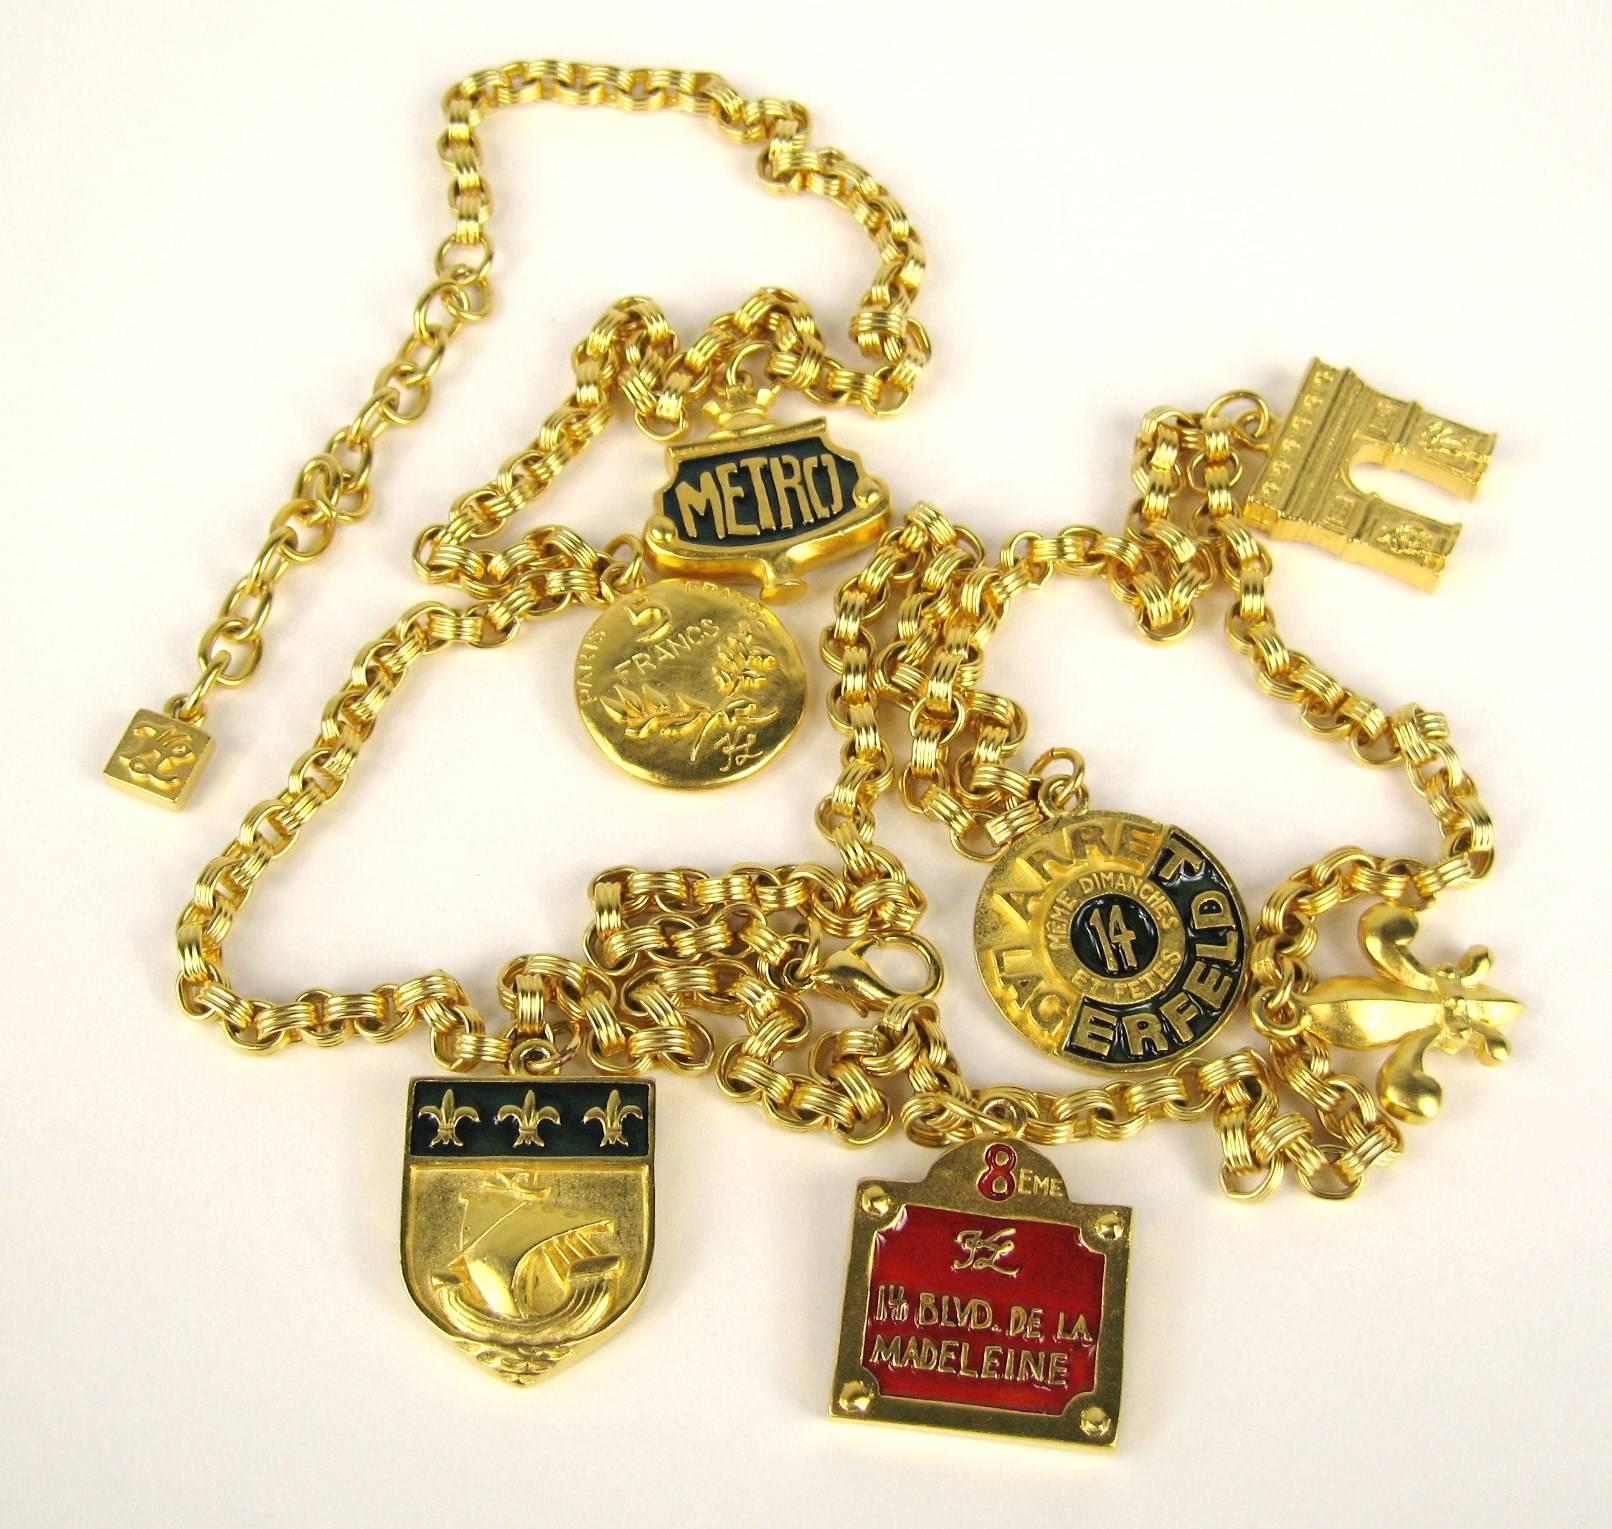 Karl Lagerfeld Gilt metal with Red Enamel with the words 14 Blvd De La Madeleine Charm Necklace or belt. Charms include 14 Blvd De La Madeleine/ 5 francs/ meme dimanchie et petes / Metro. I have more of this set listed on my storefront. It  measures